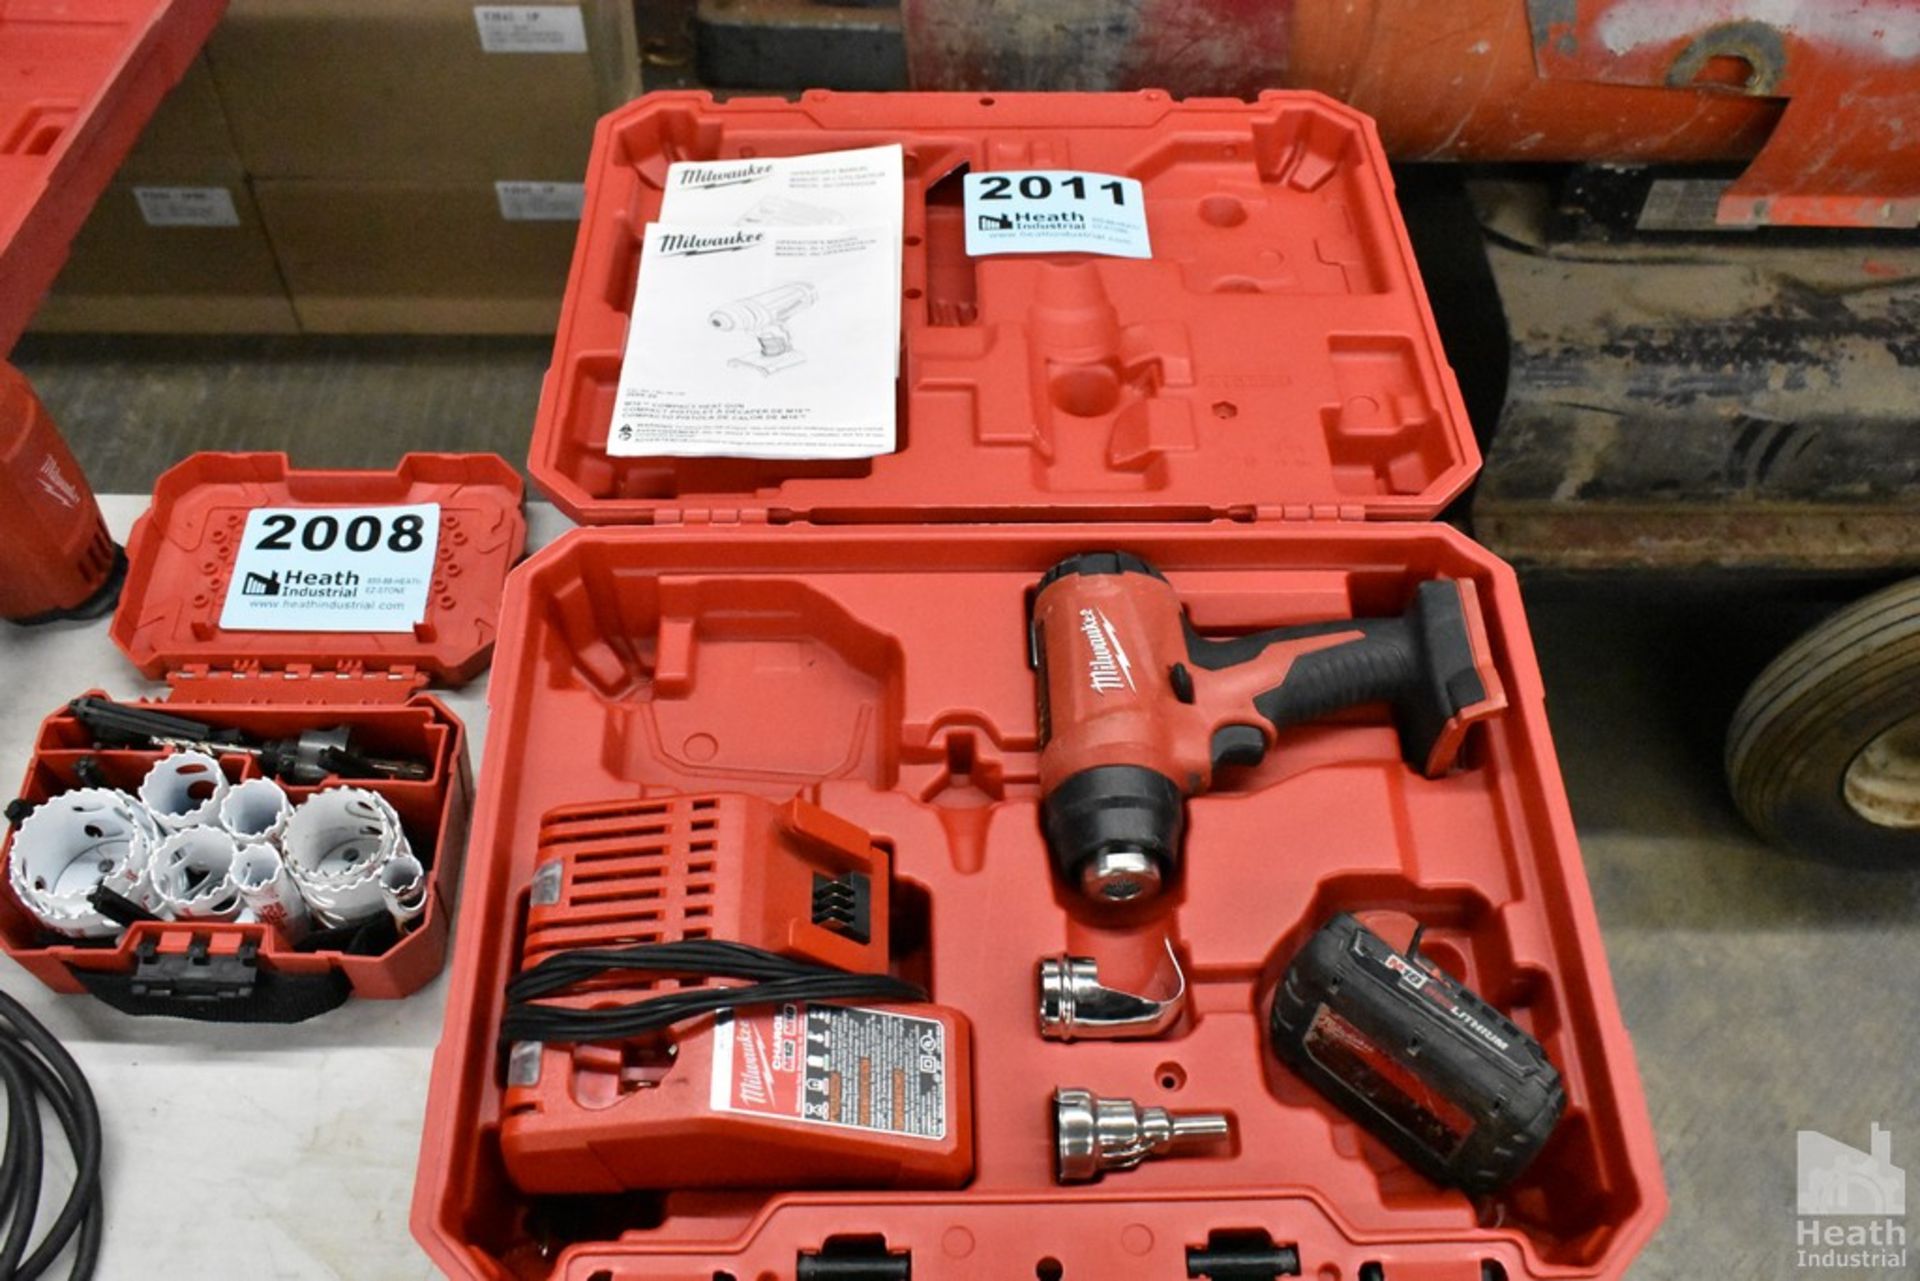 MILWAUKEE COMPACT HEAT GUN, MODEL 2688-20, WITH CHARGER, BATTERY AND CASE